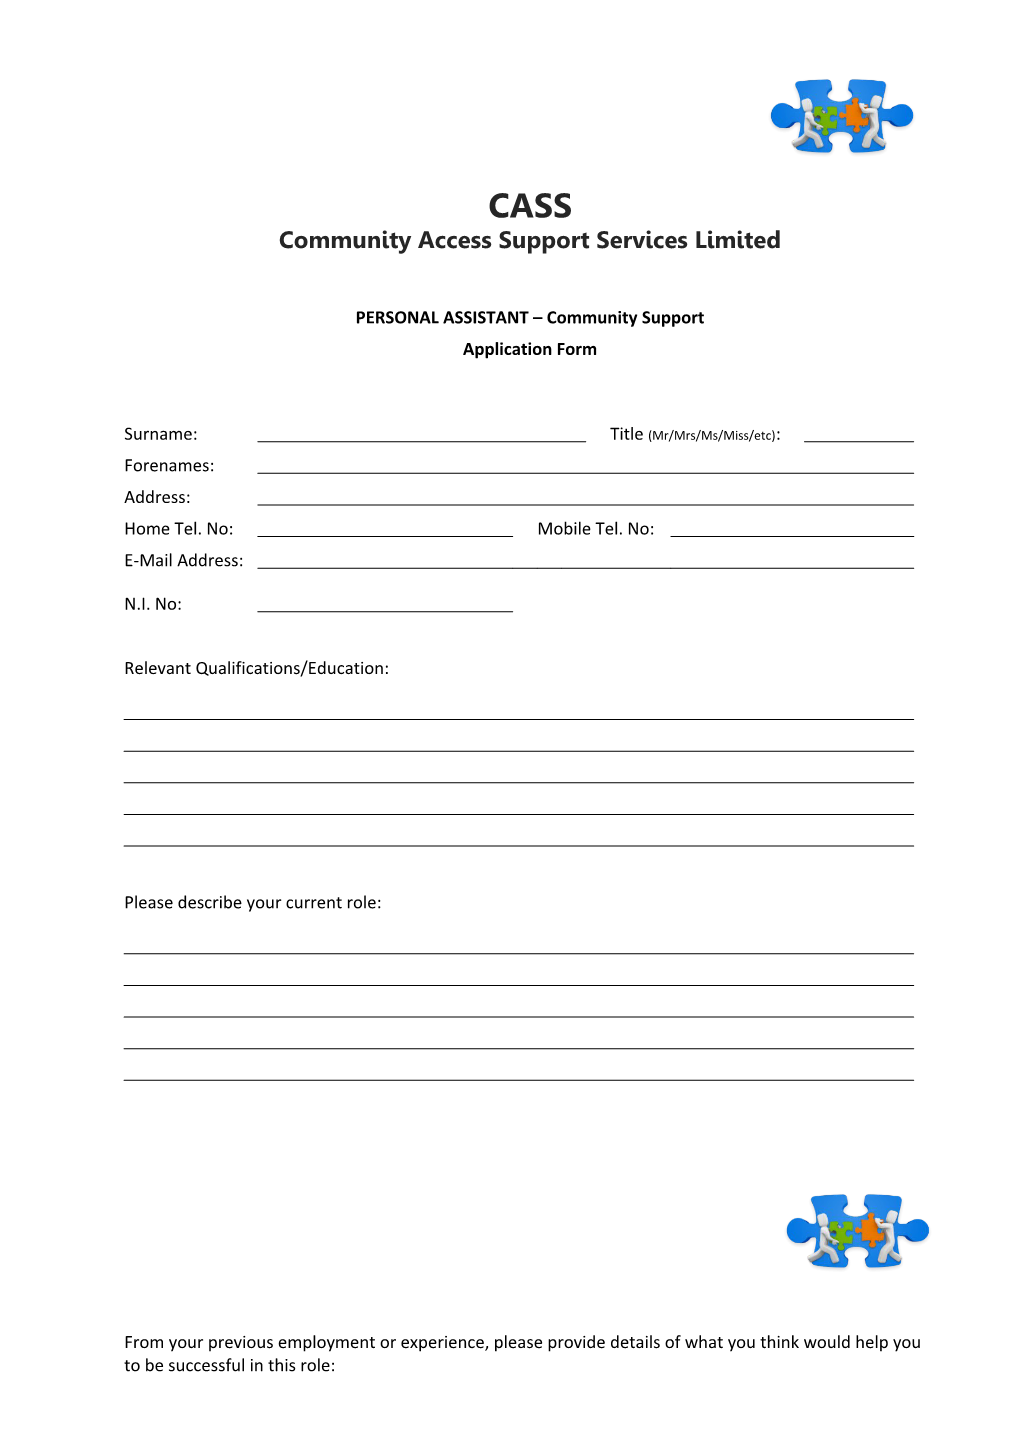 Community Access Support Services Limited